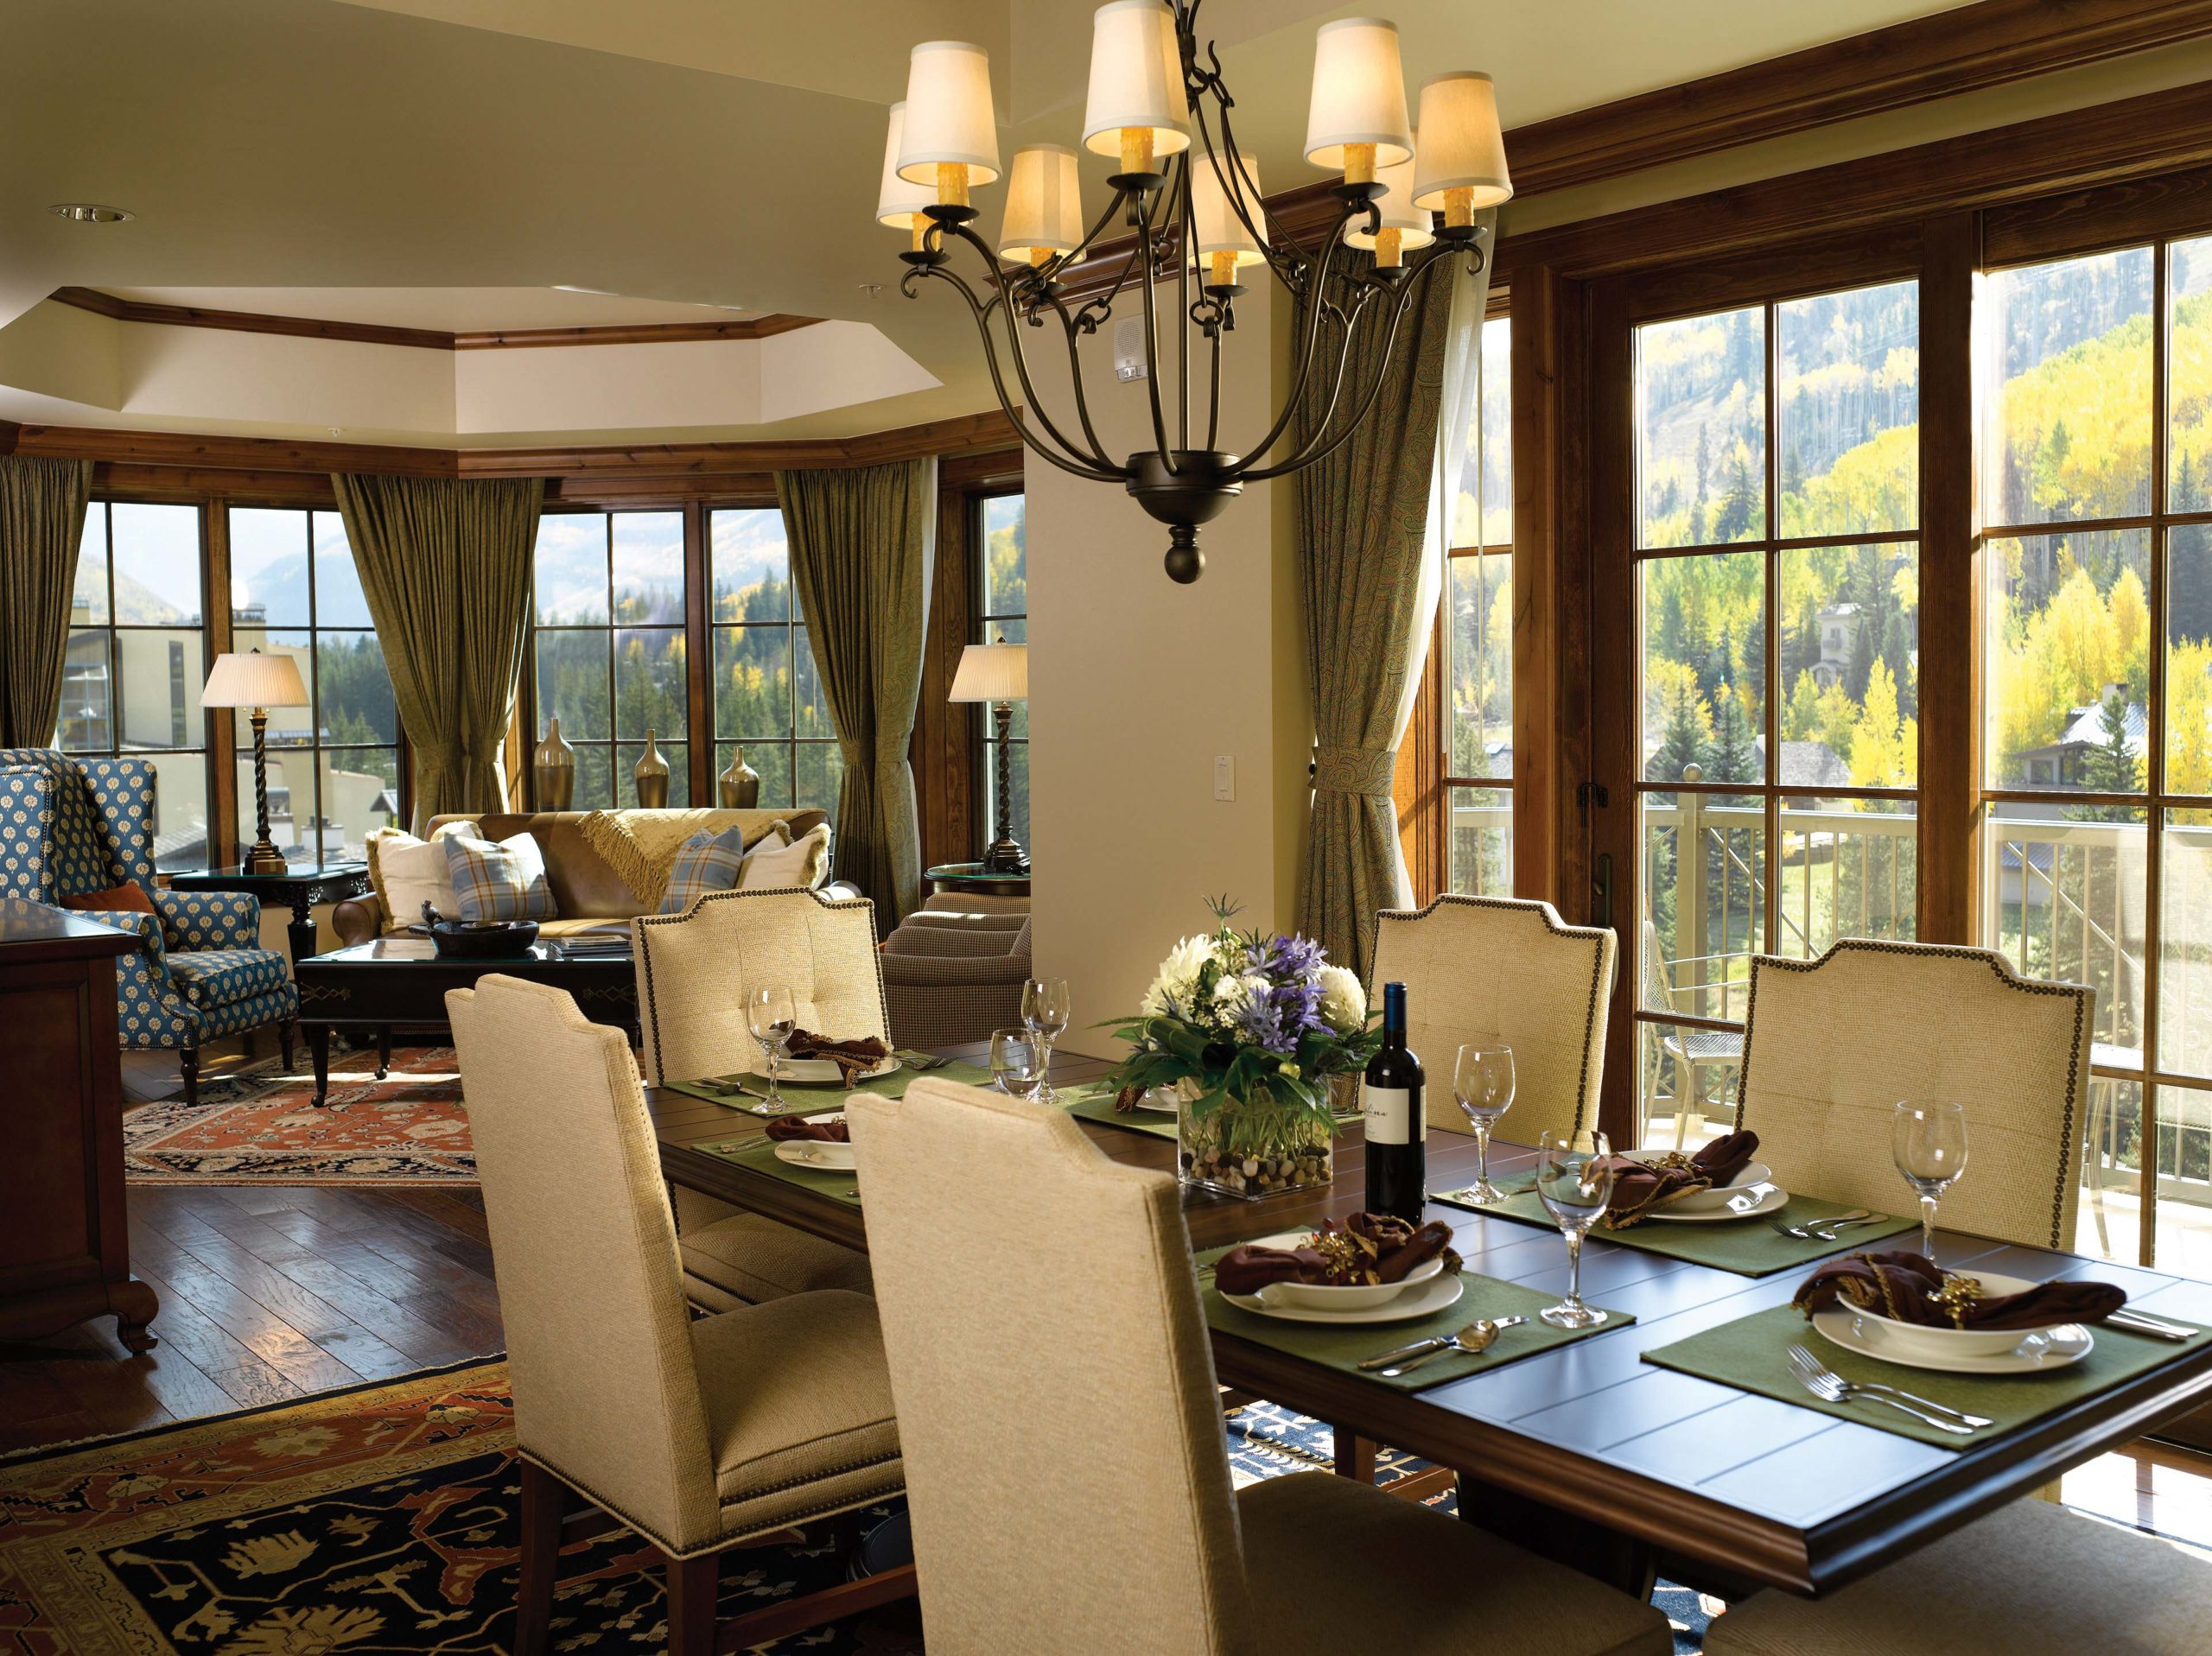 Lavish grand dining room with chandeliers and table settings